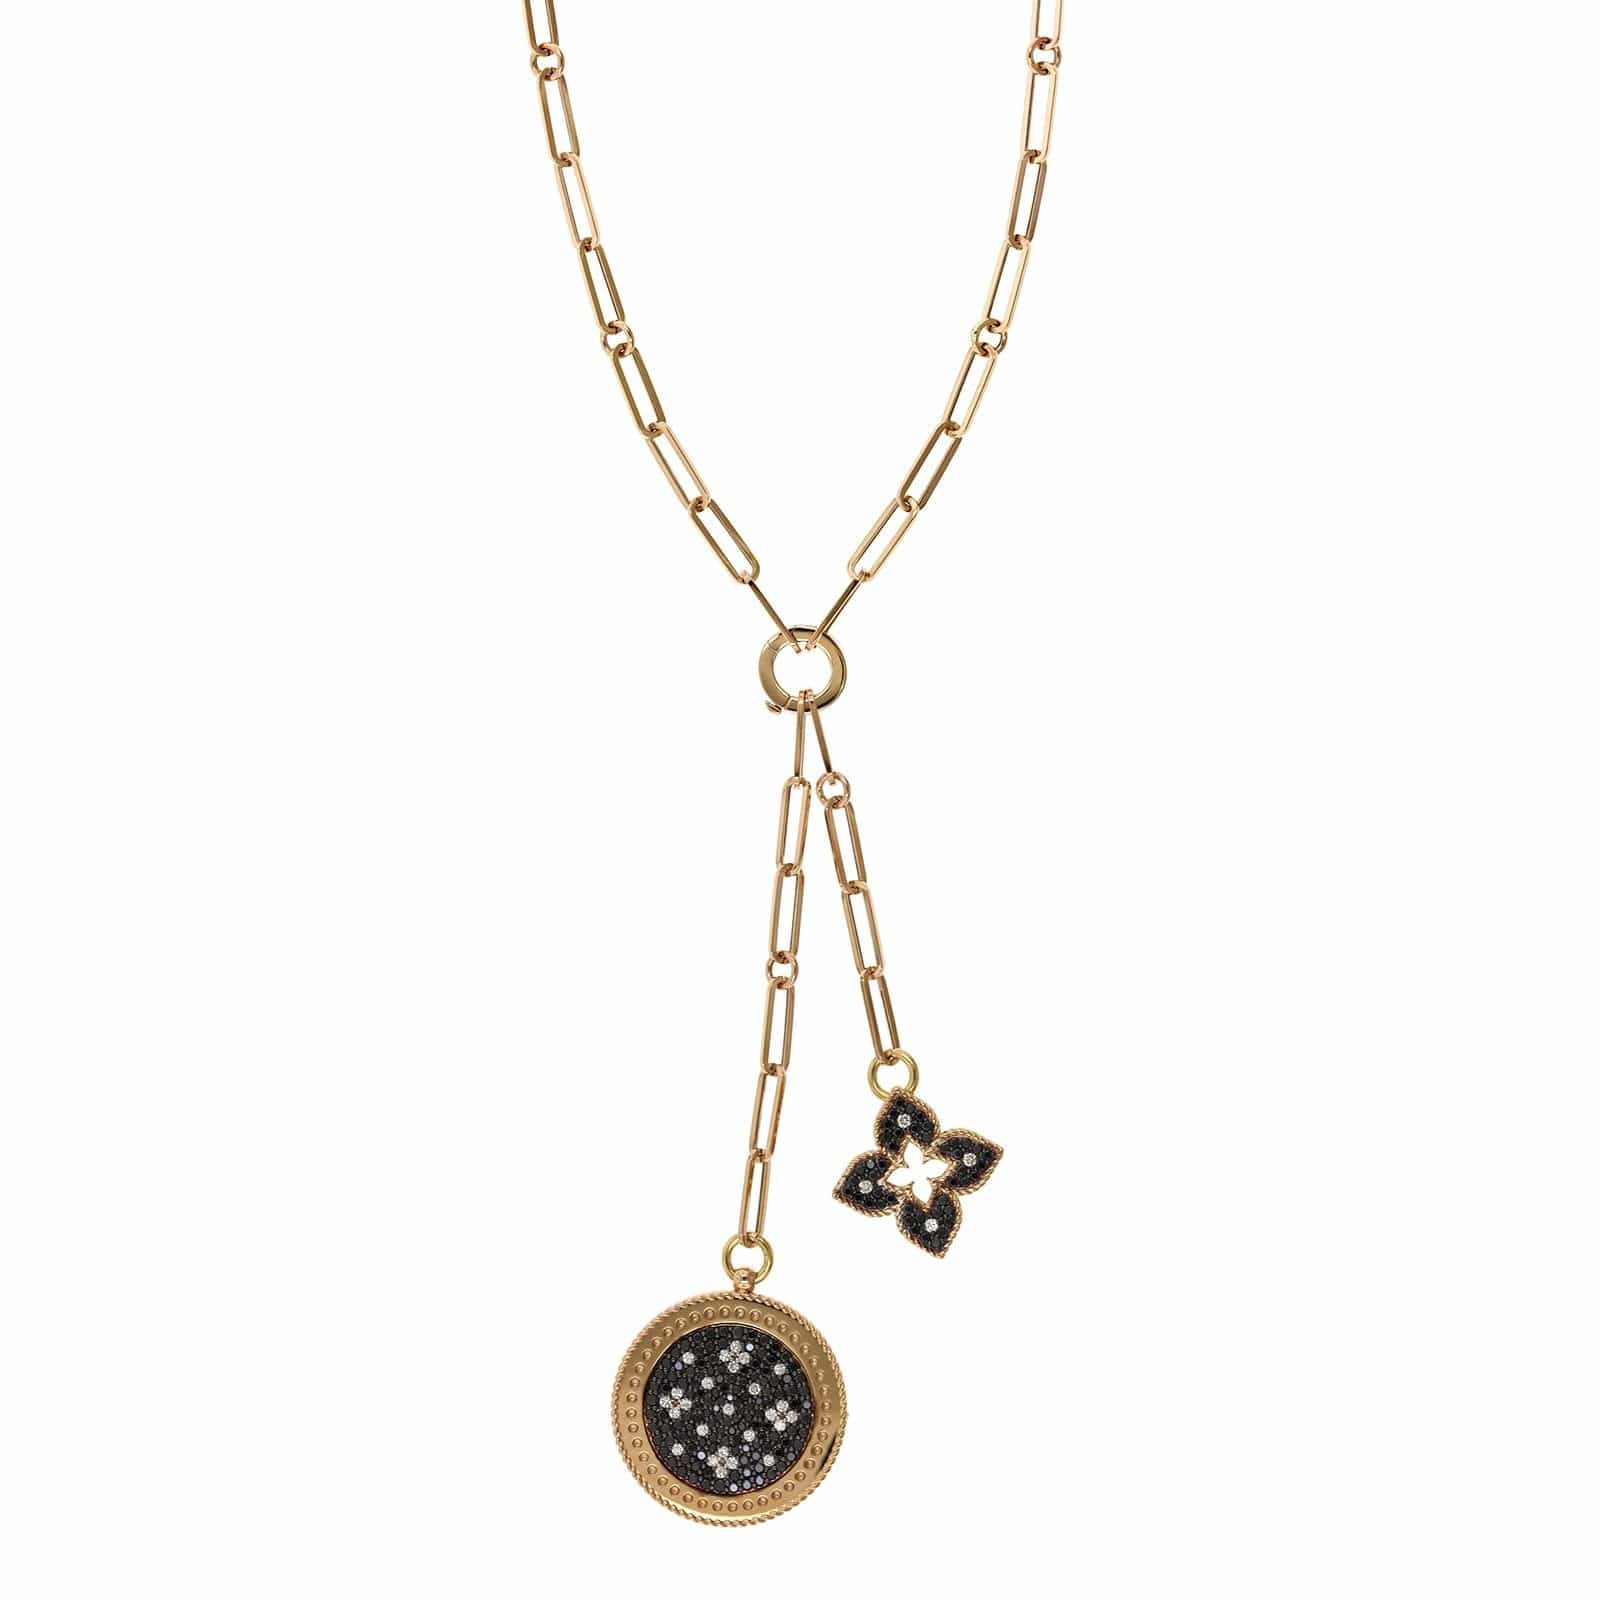 18K ROSE GOLD PALAZZO DUCALE BLACK JADE & DIAMOND STATION LONG NECKLACE -  Roberto Coin - North America